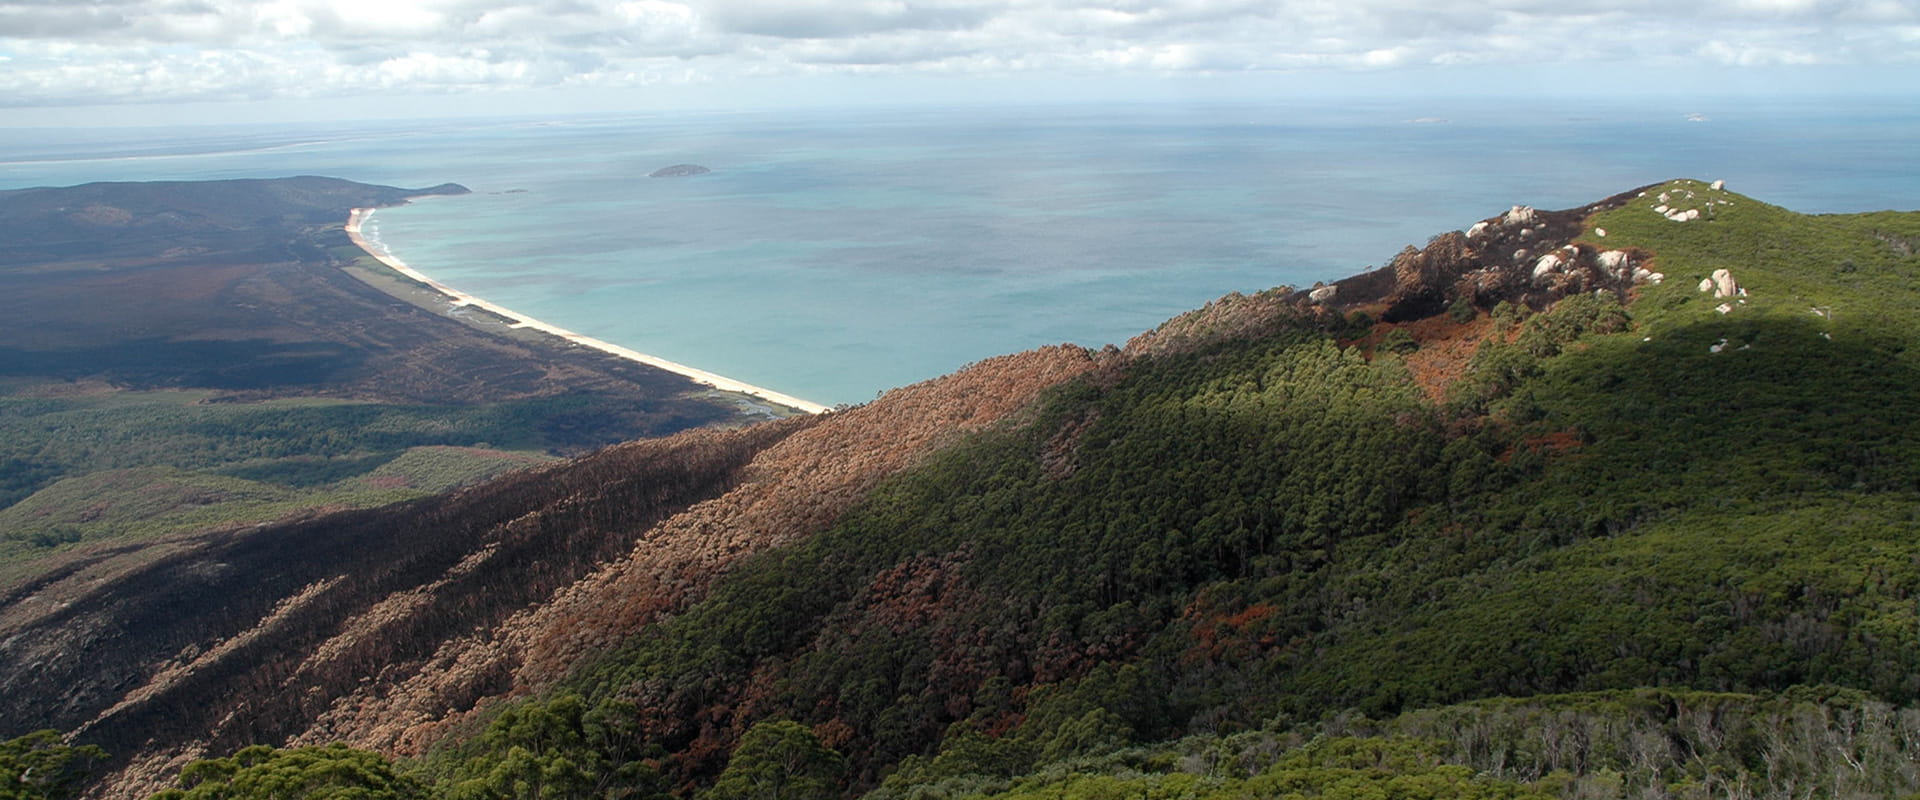 A view looking over Oberon Bay at Wilsons Promontory National Park.